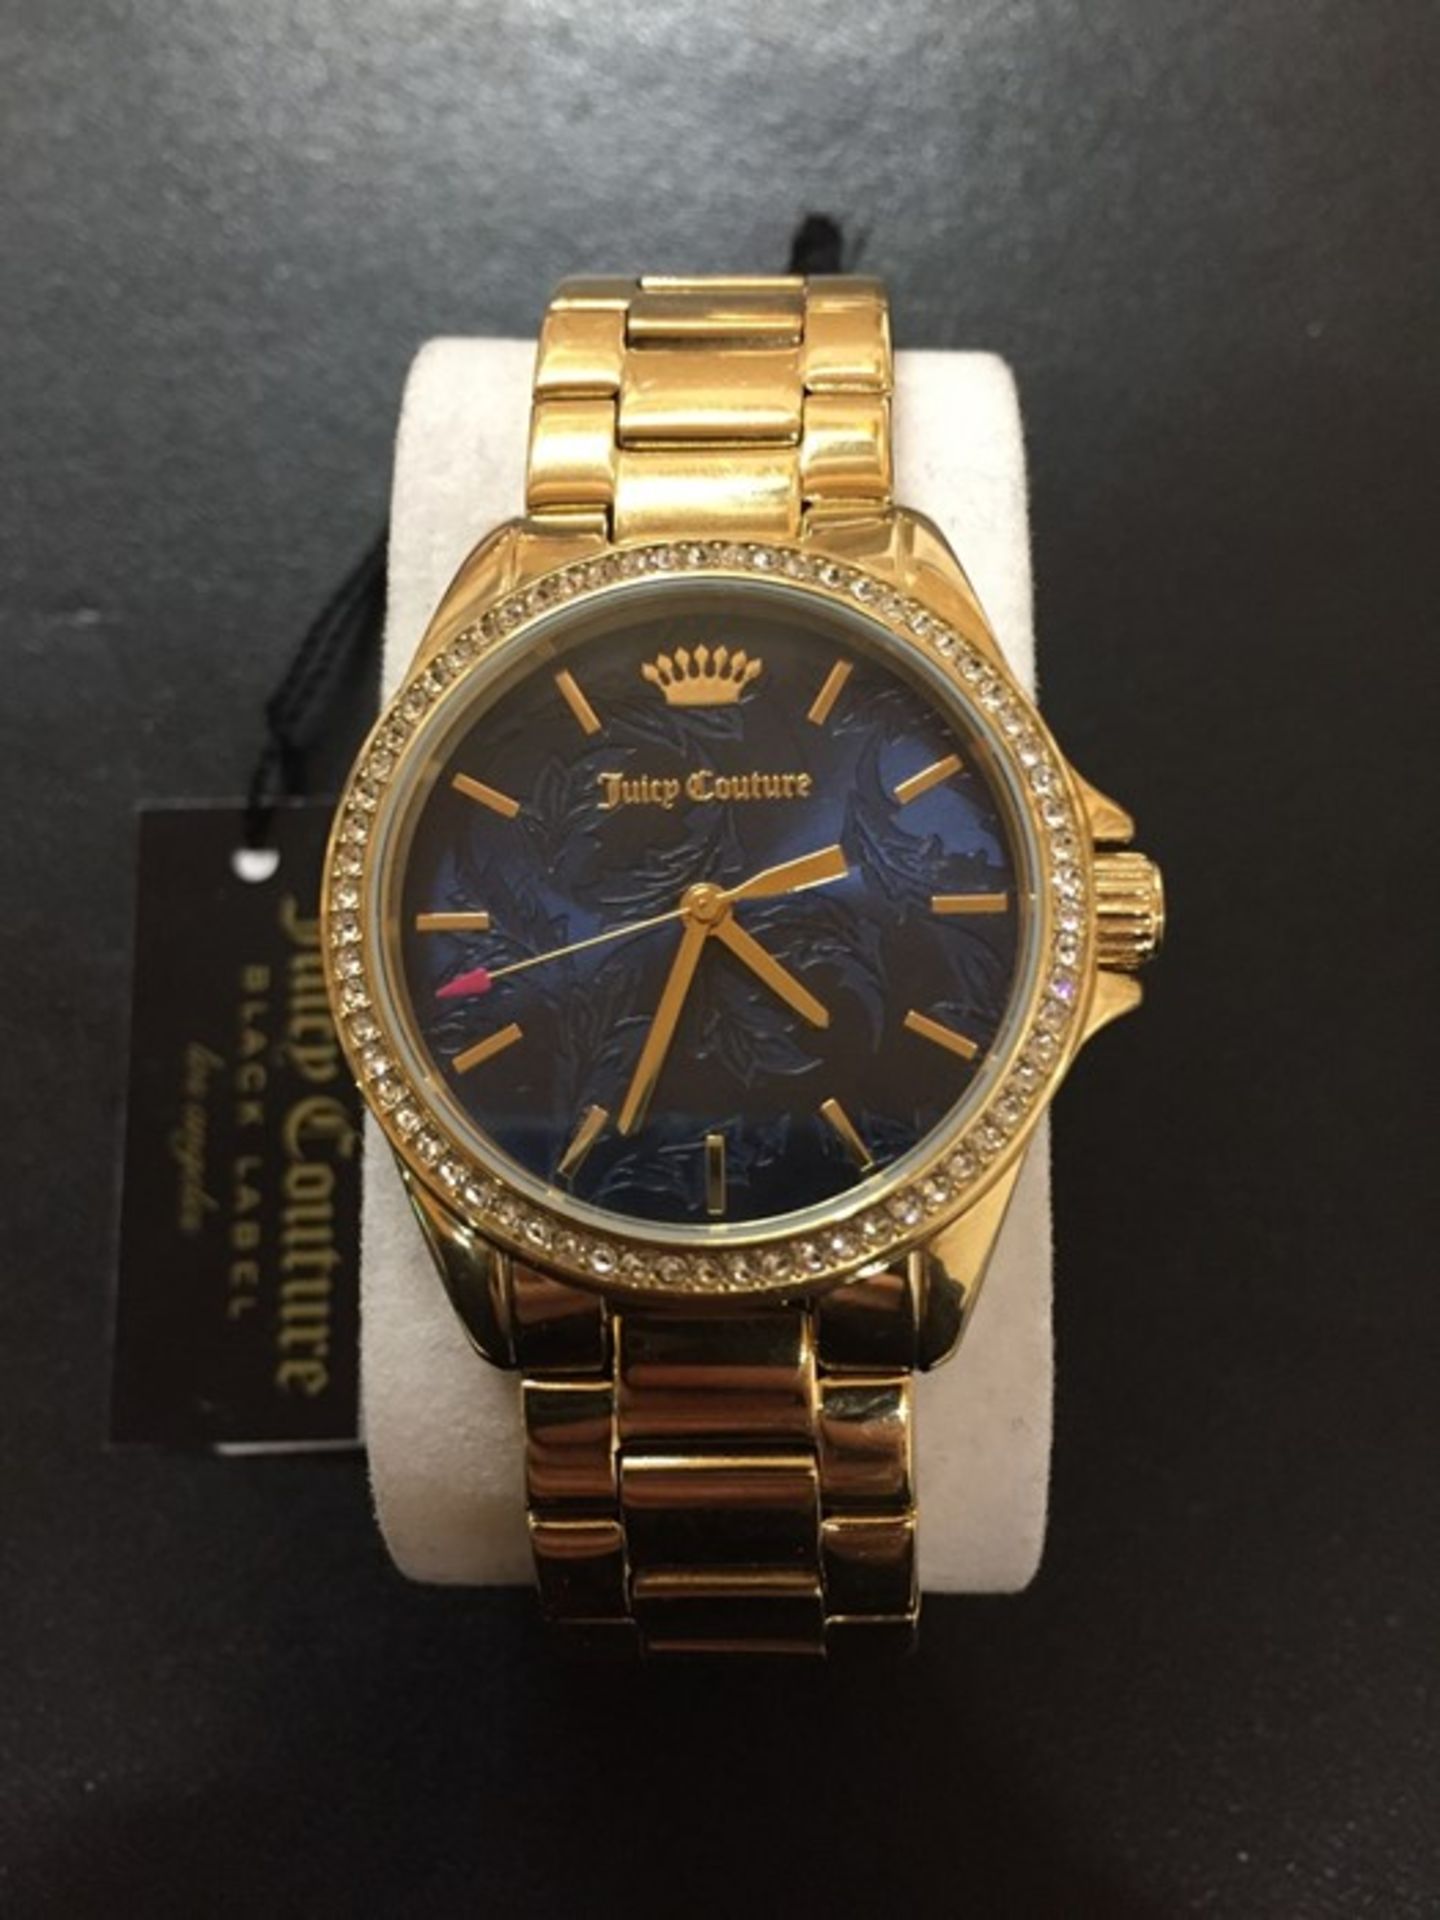 1 UNBOXED LADIES JUICY COUTURE LAGUNA WATCH 1901519 IN GOLD / RRP £225.00 (VIEWING IS AVALABLE)